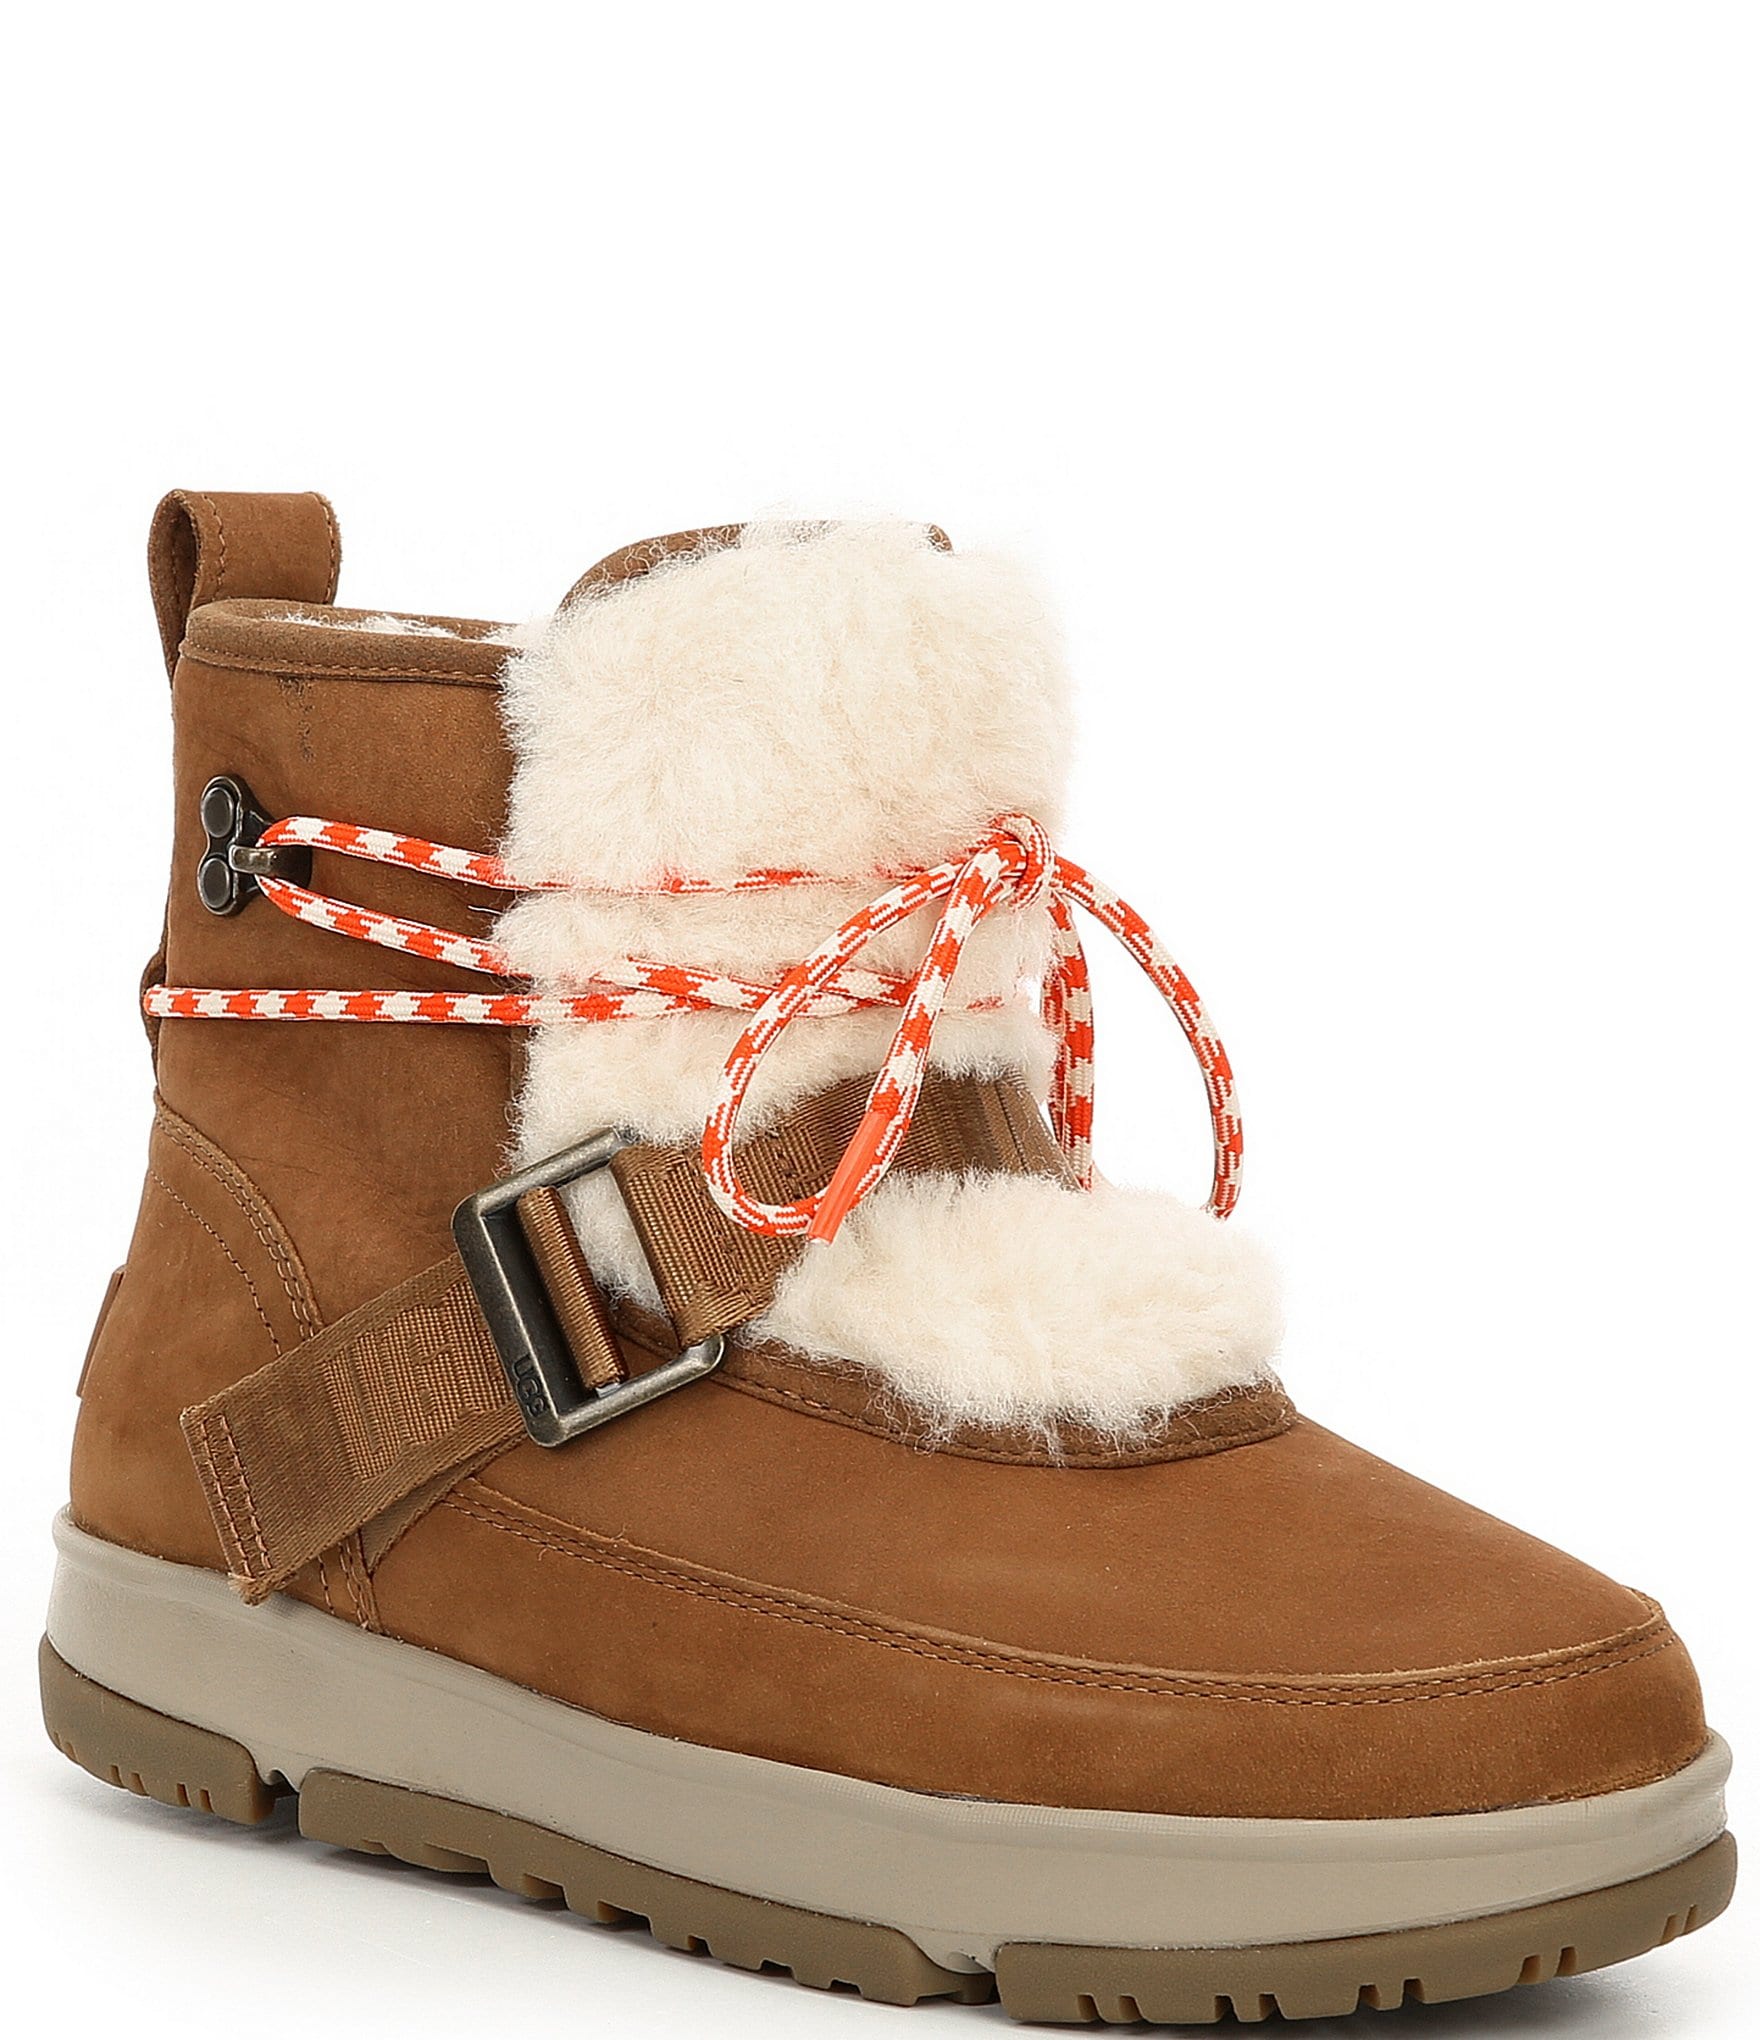 ugg boots with laces